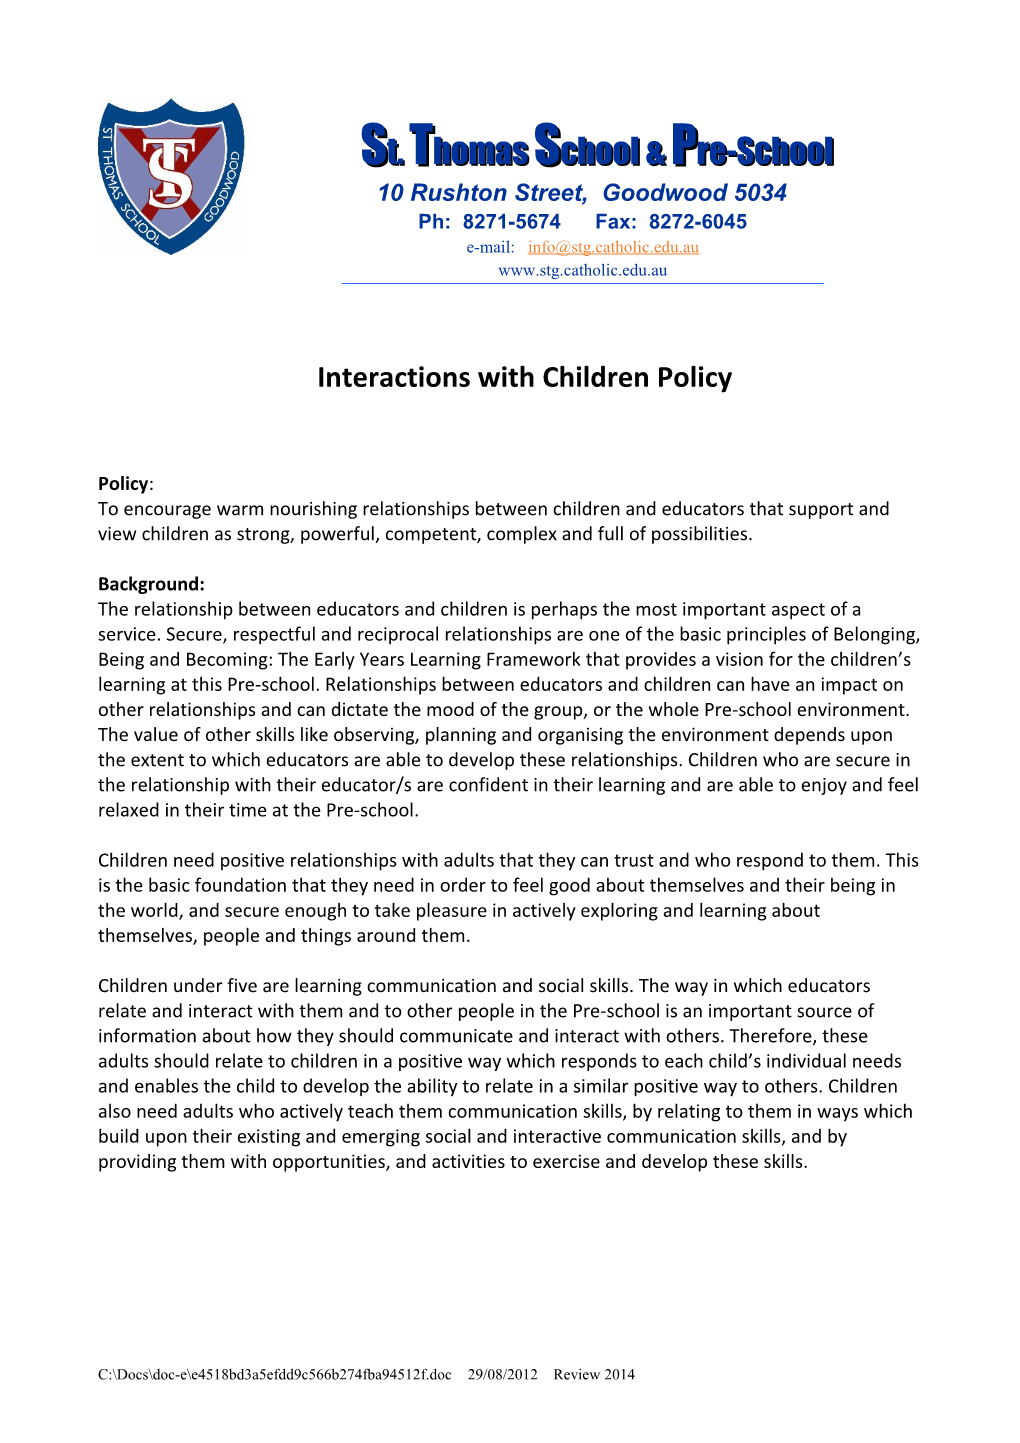 Interactions with Children Policy